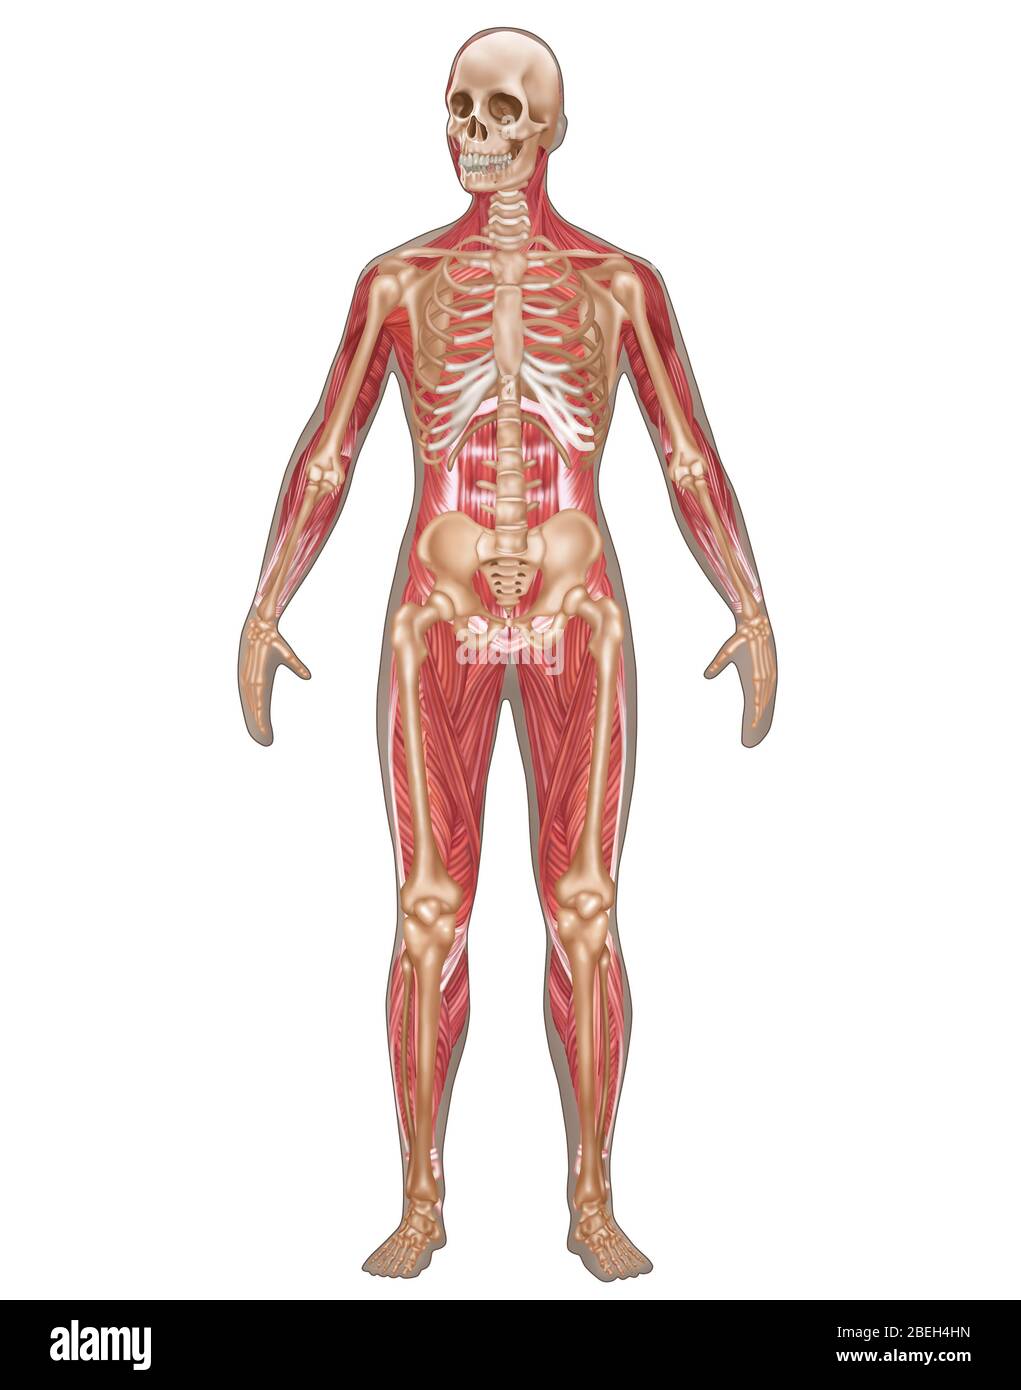 Skeletal & Muscular Systems, Female Anatomy Stock Photo